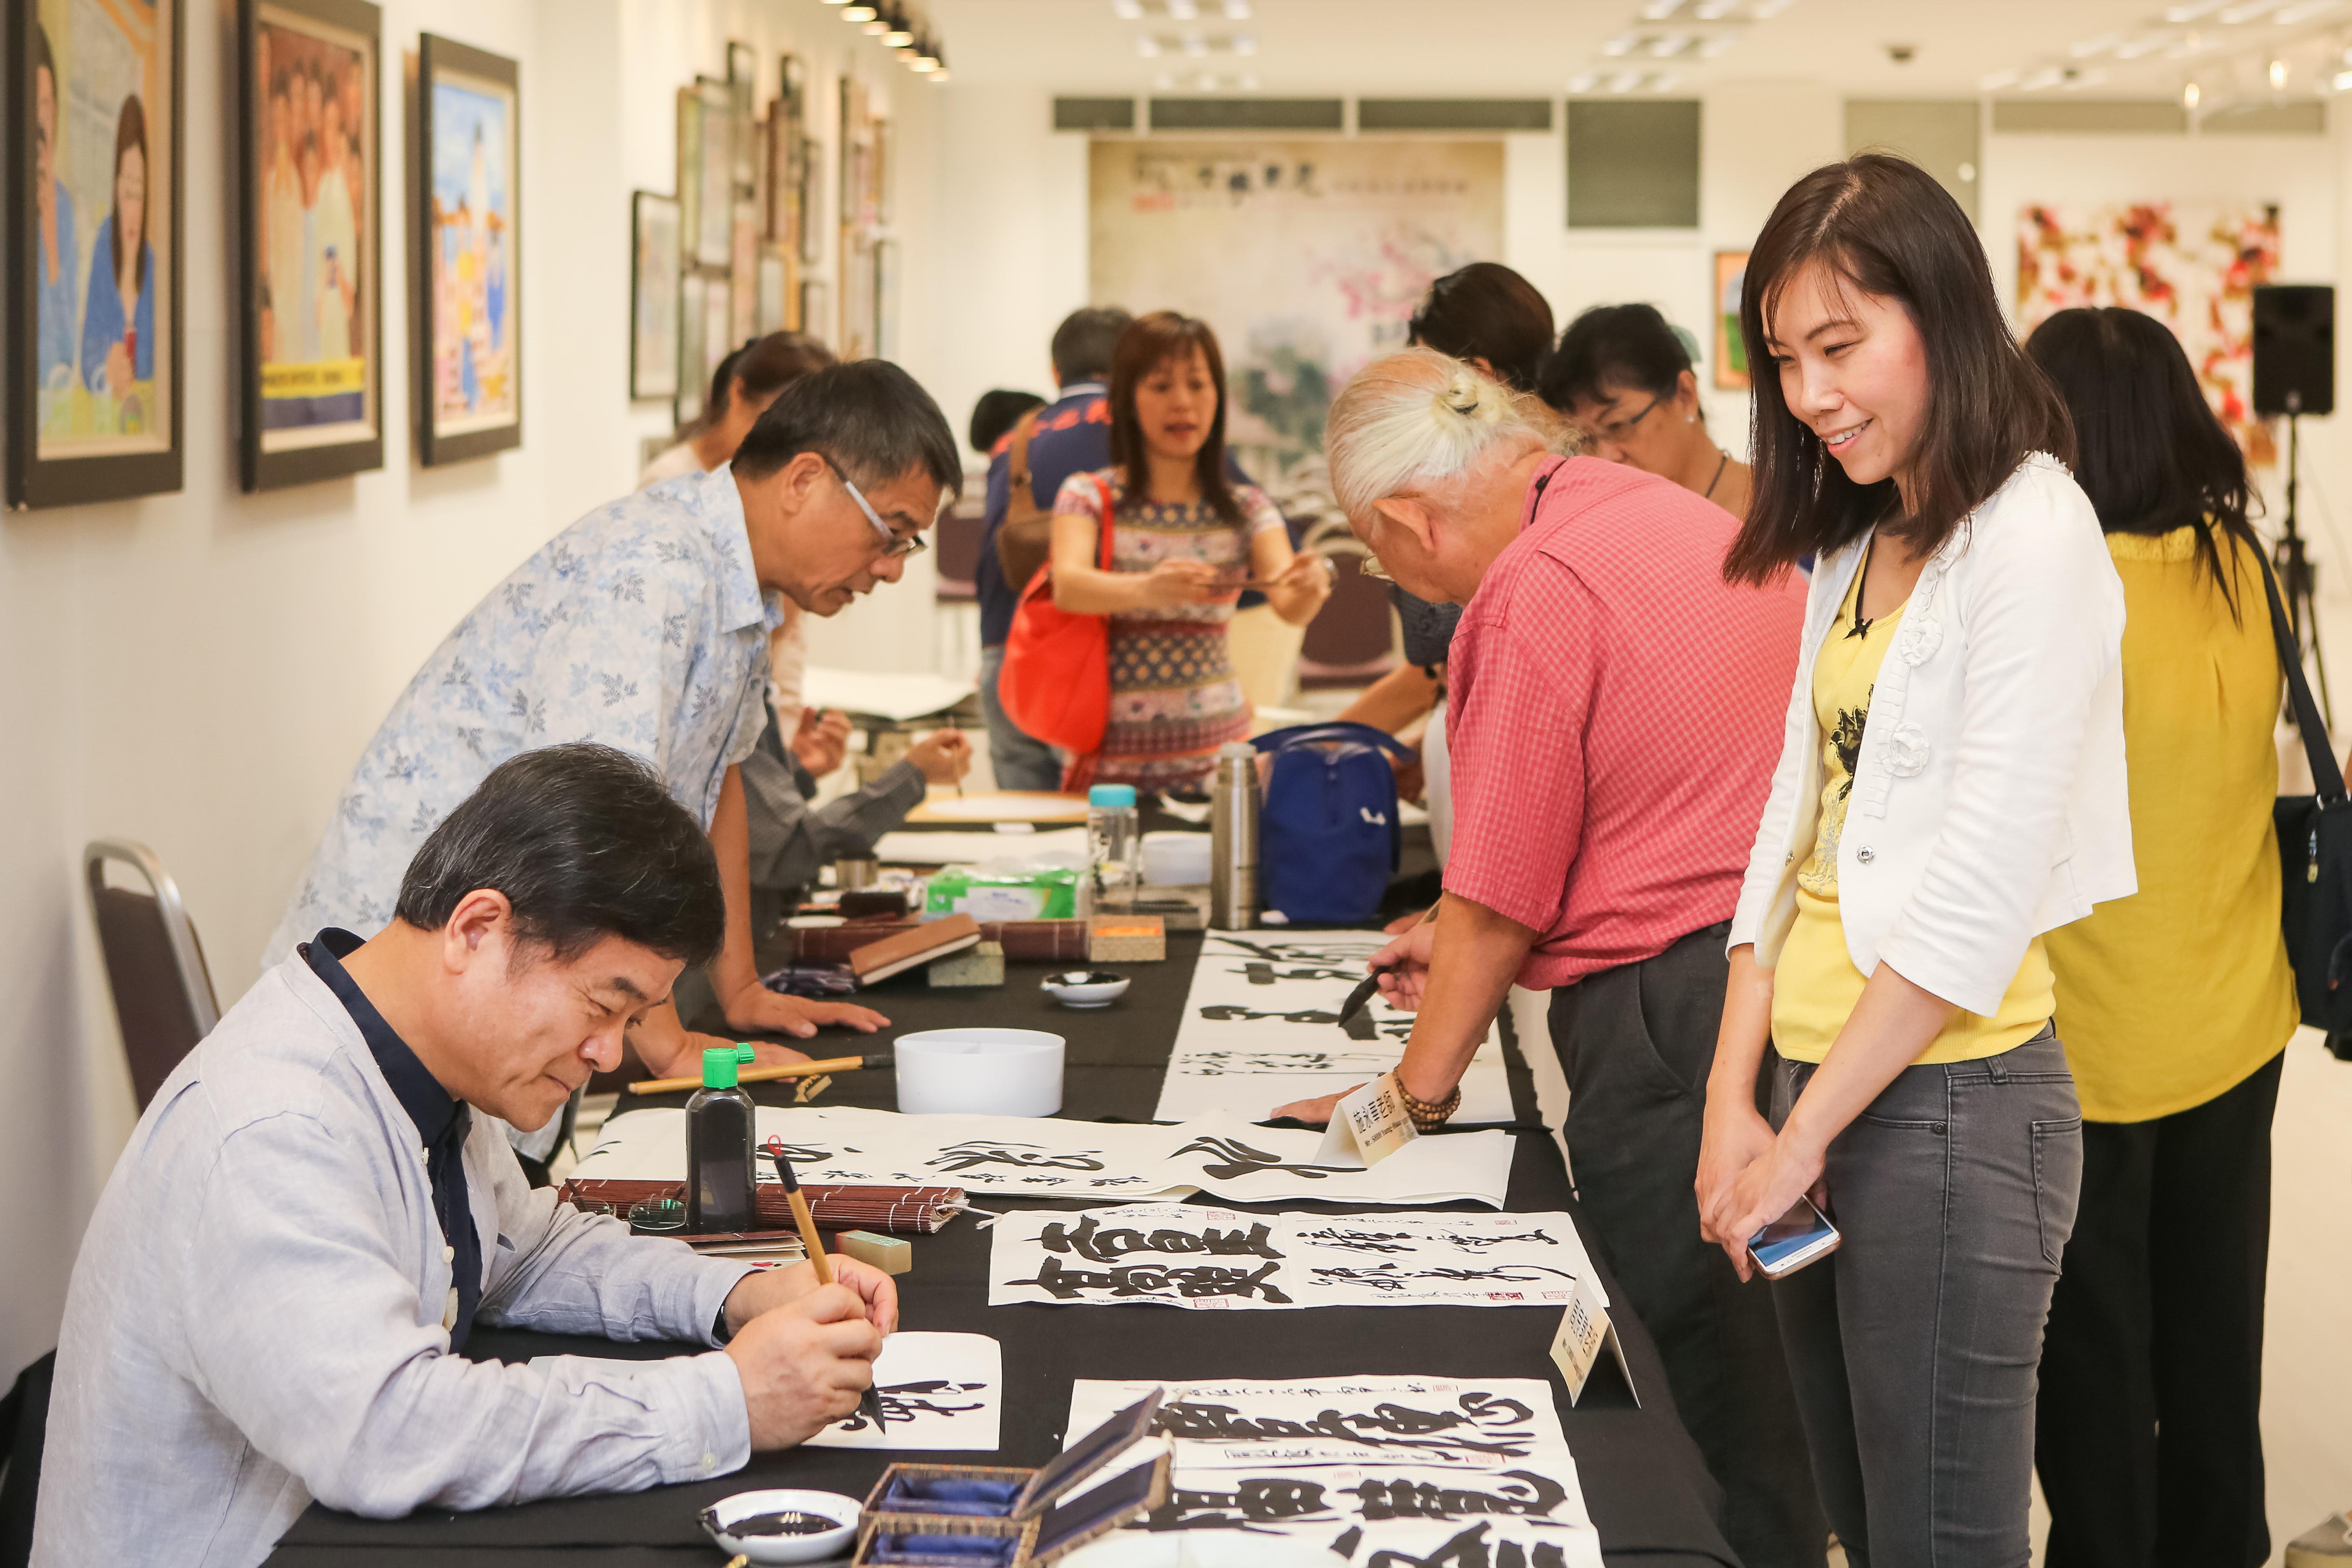 Four artists from Taiwan showcased their unique artworks in the demonstration of Chinese Calligraphy &amp; Chinese Ink Drawing session.

